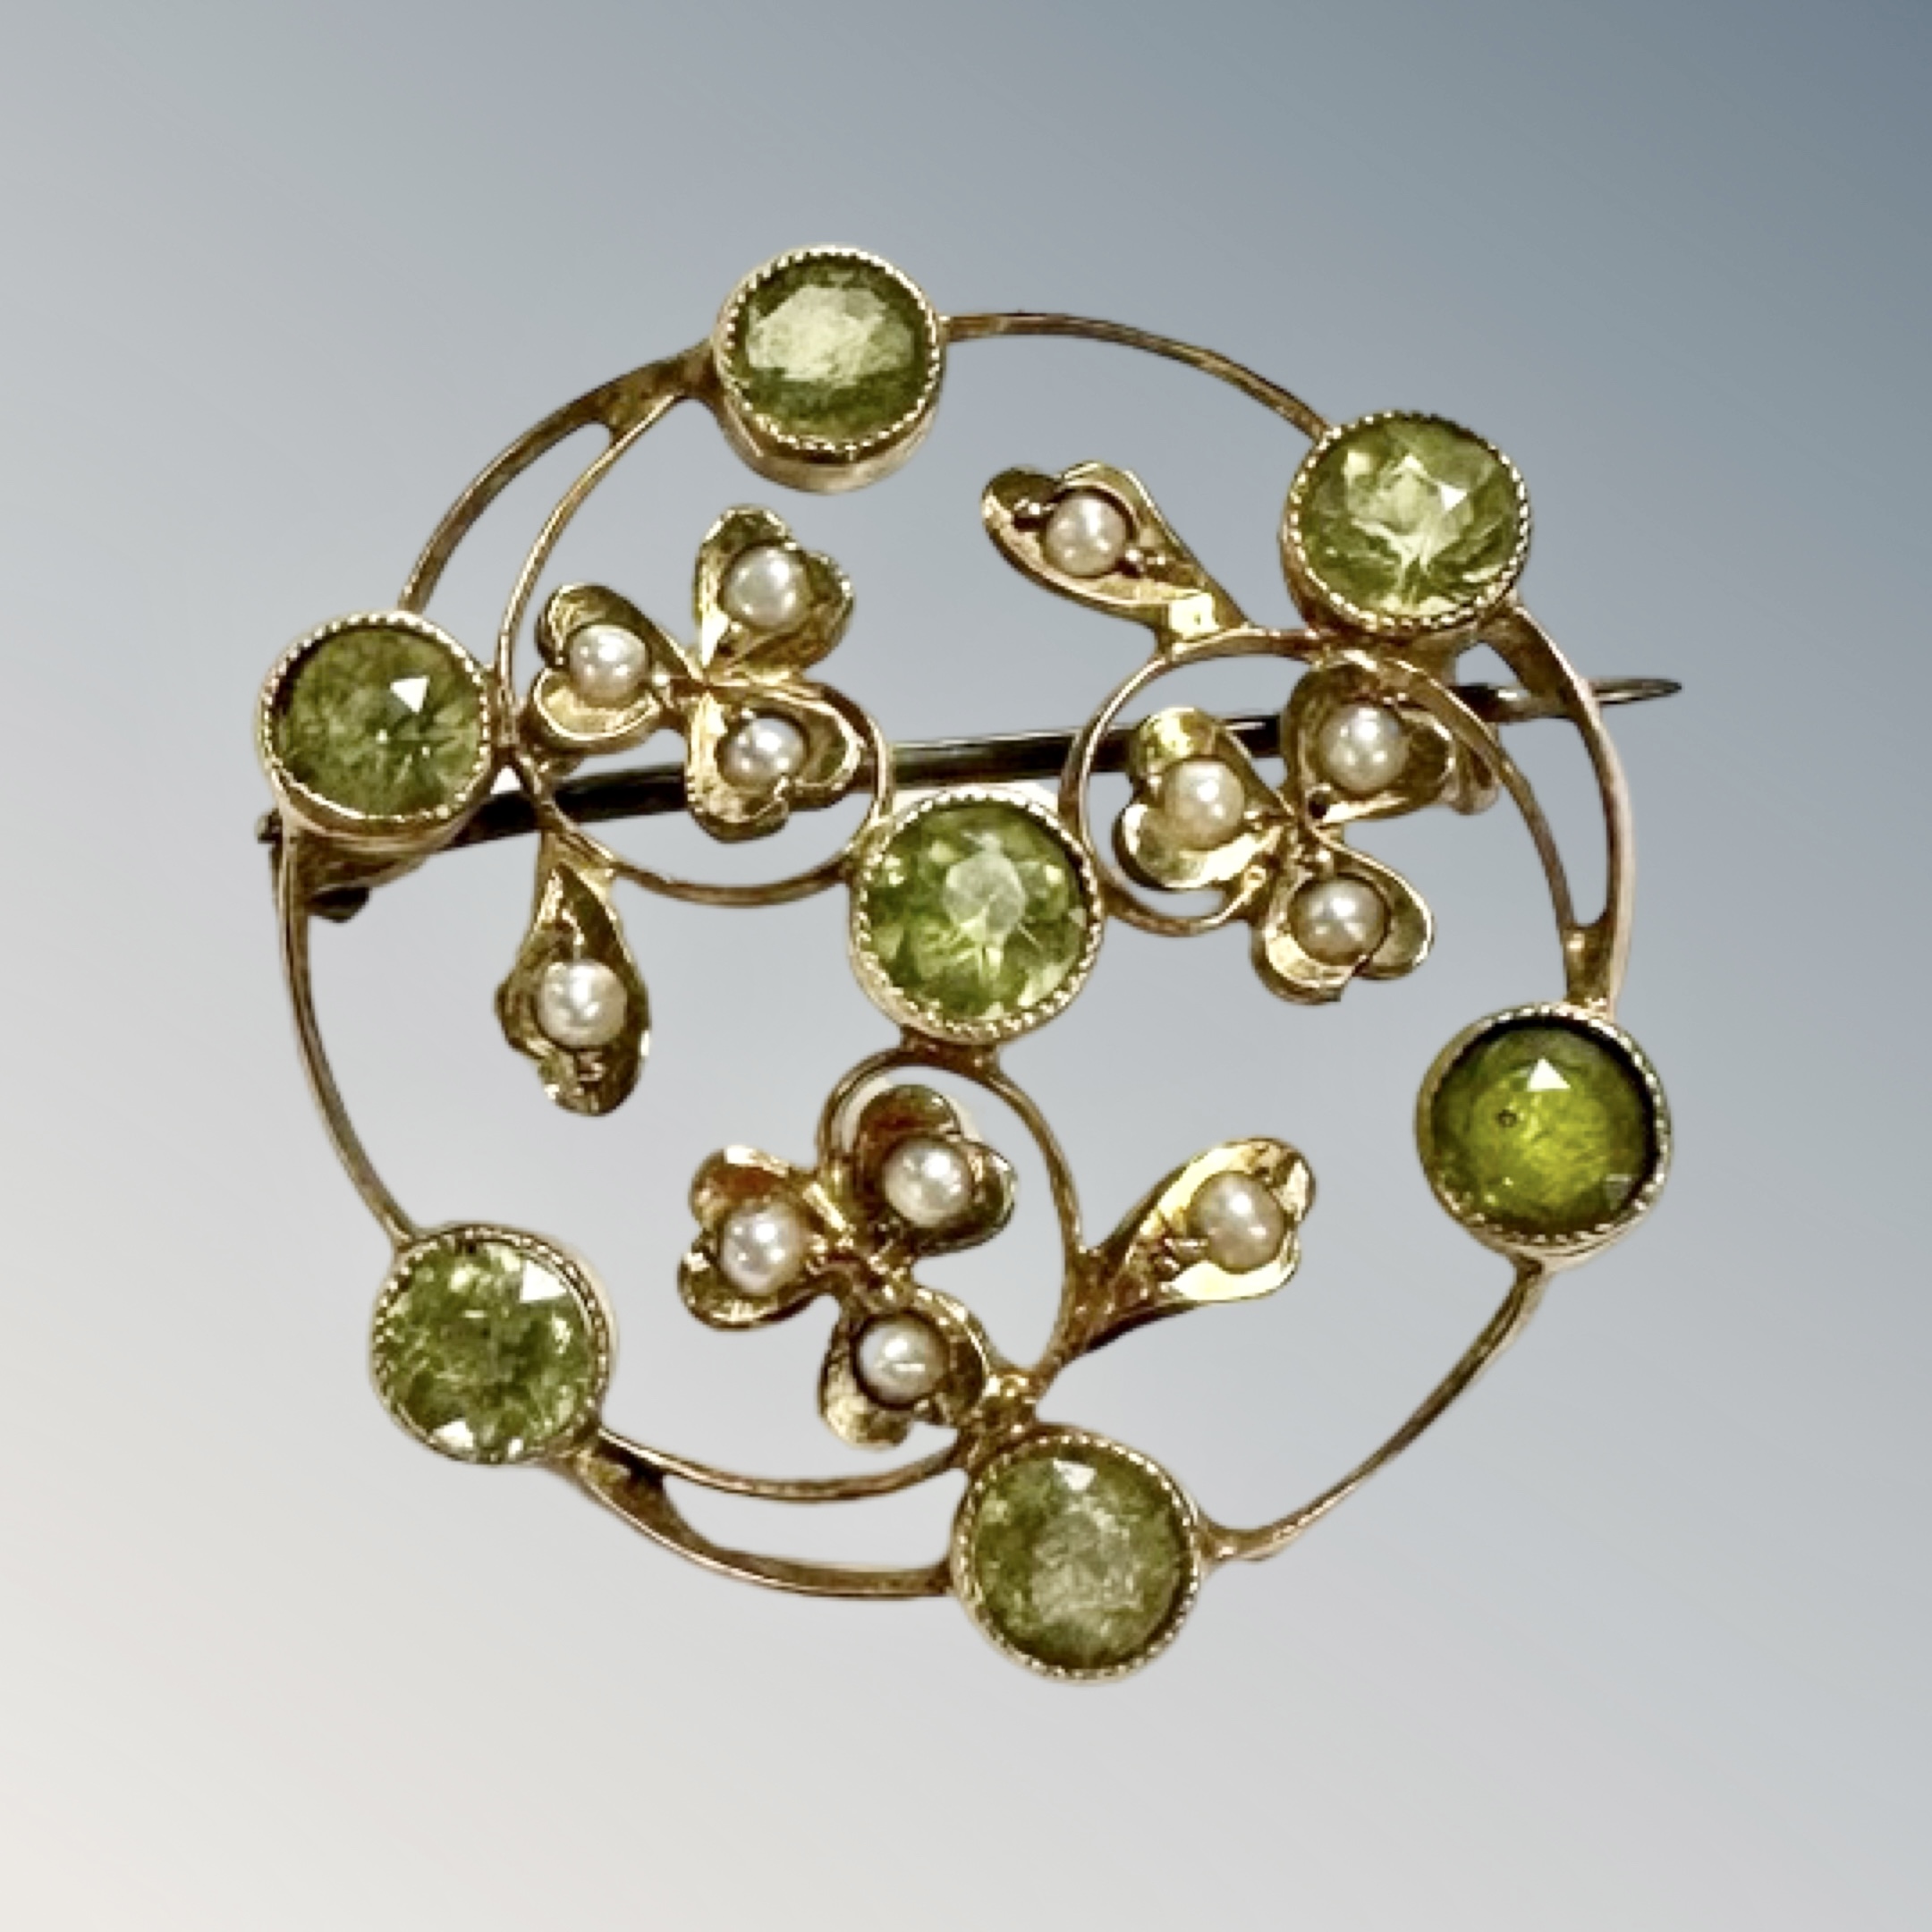 A vintage 9ct gold and peridot brooch.